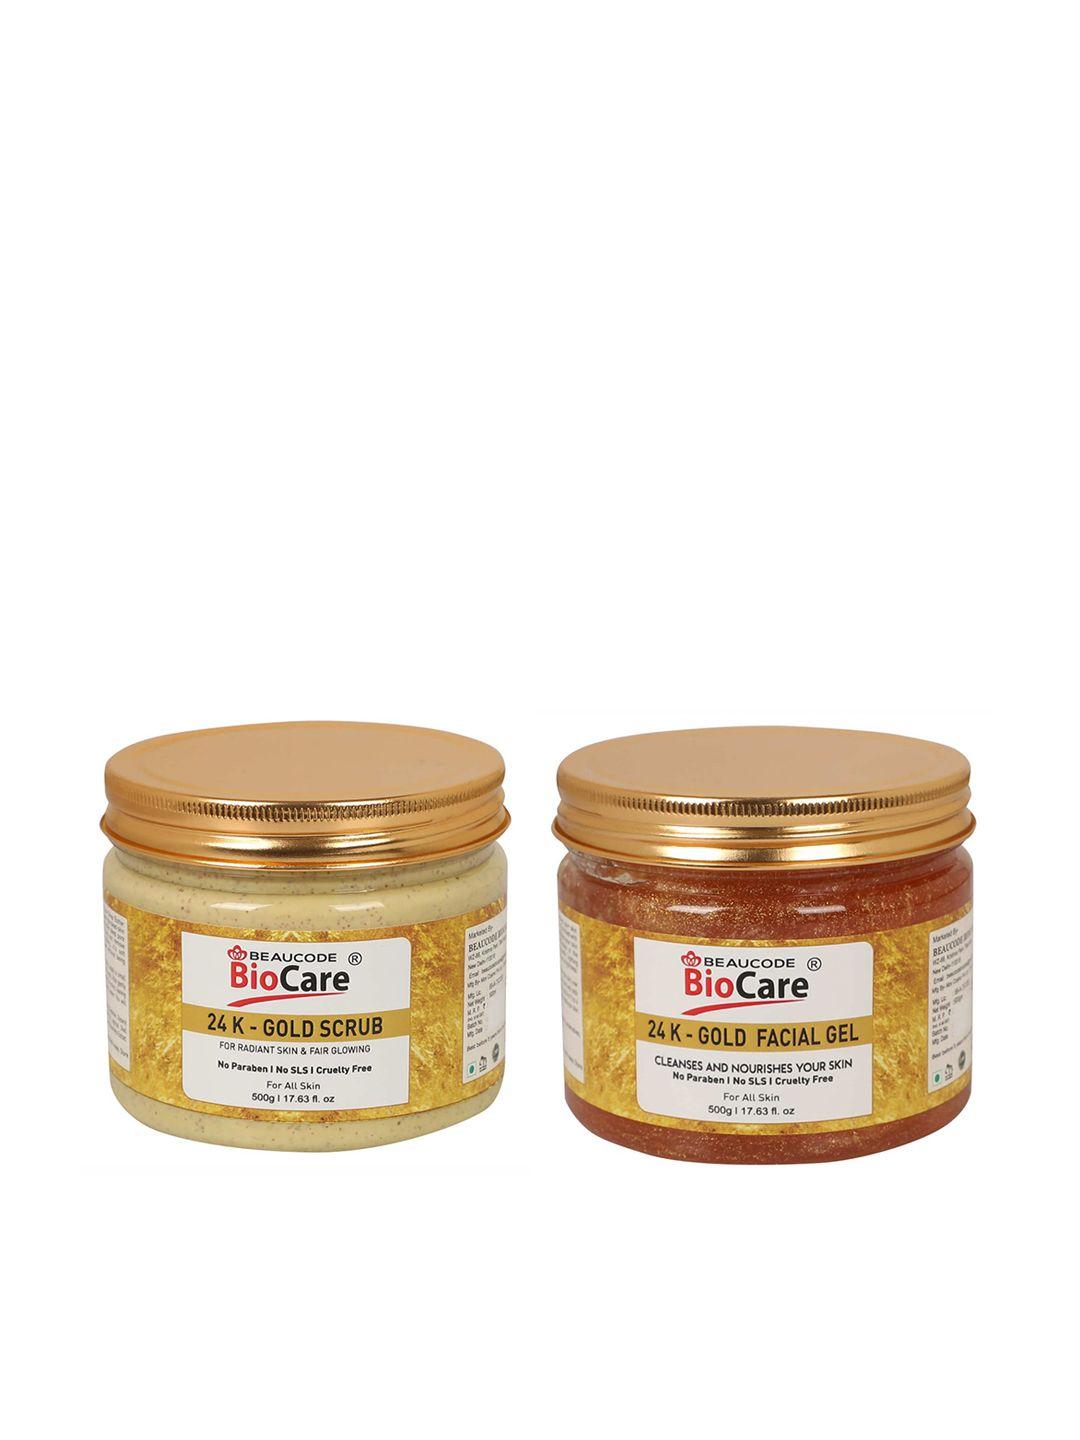 beaucode biocare set of 2 24k gold face and body scrub and gel 1kg